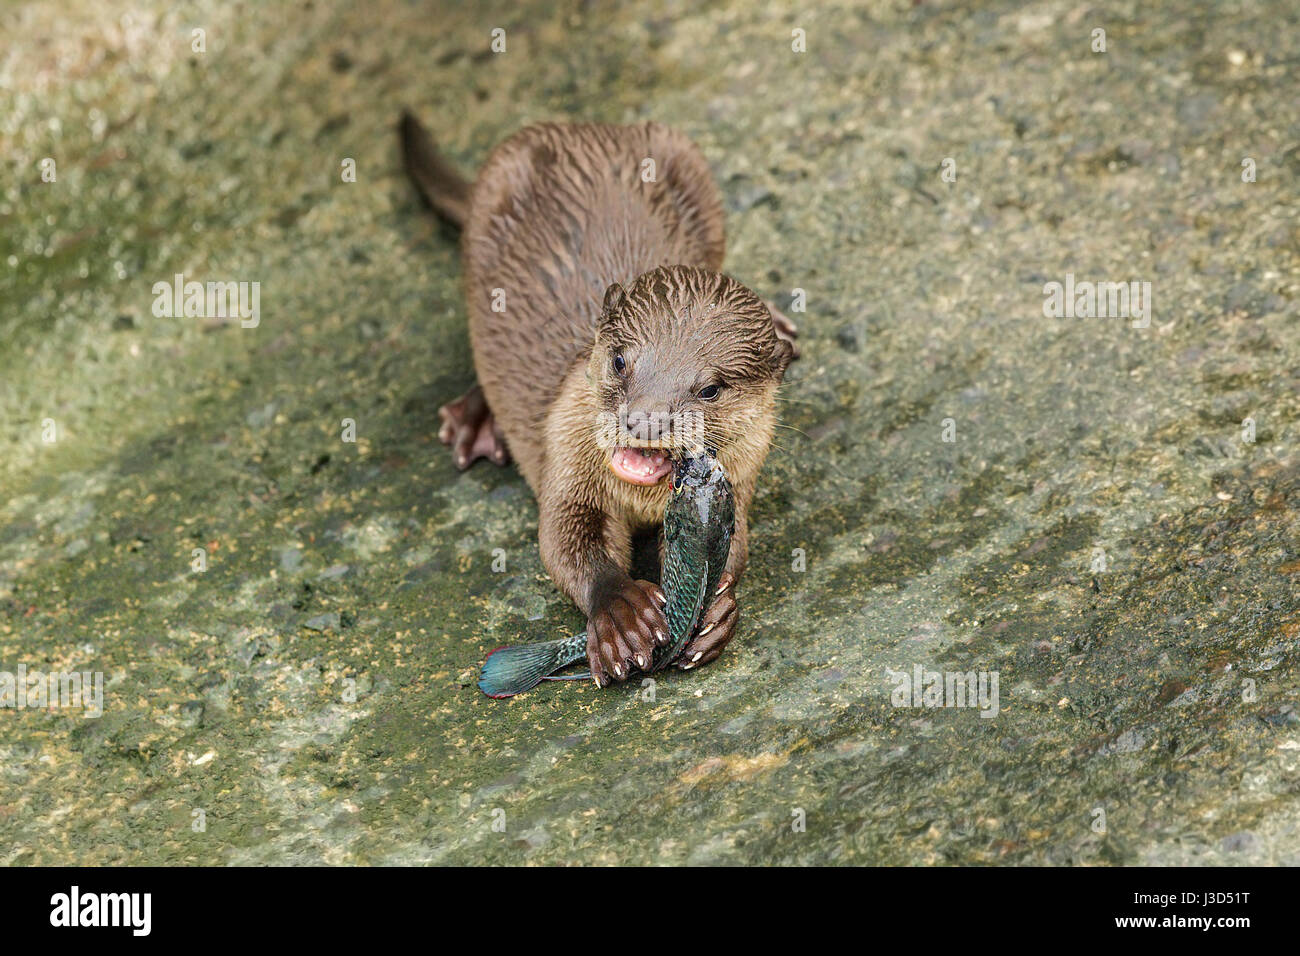 A Smooth-coated otter (Lutrogale perspicillata) cub eats fish caught by one of its parents on a concrete river bank, Singapore Stock Photo